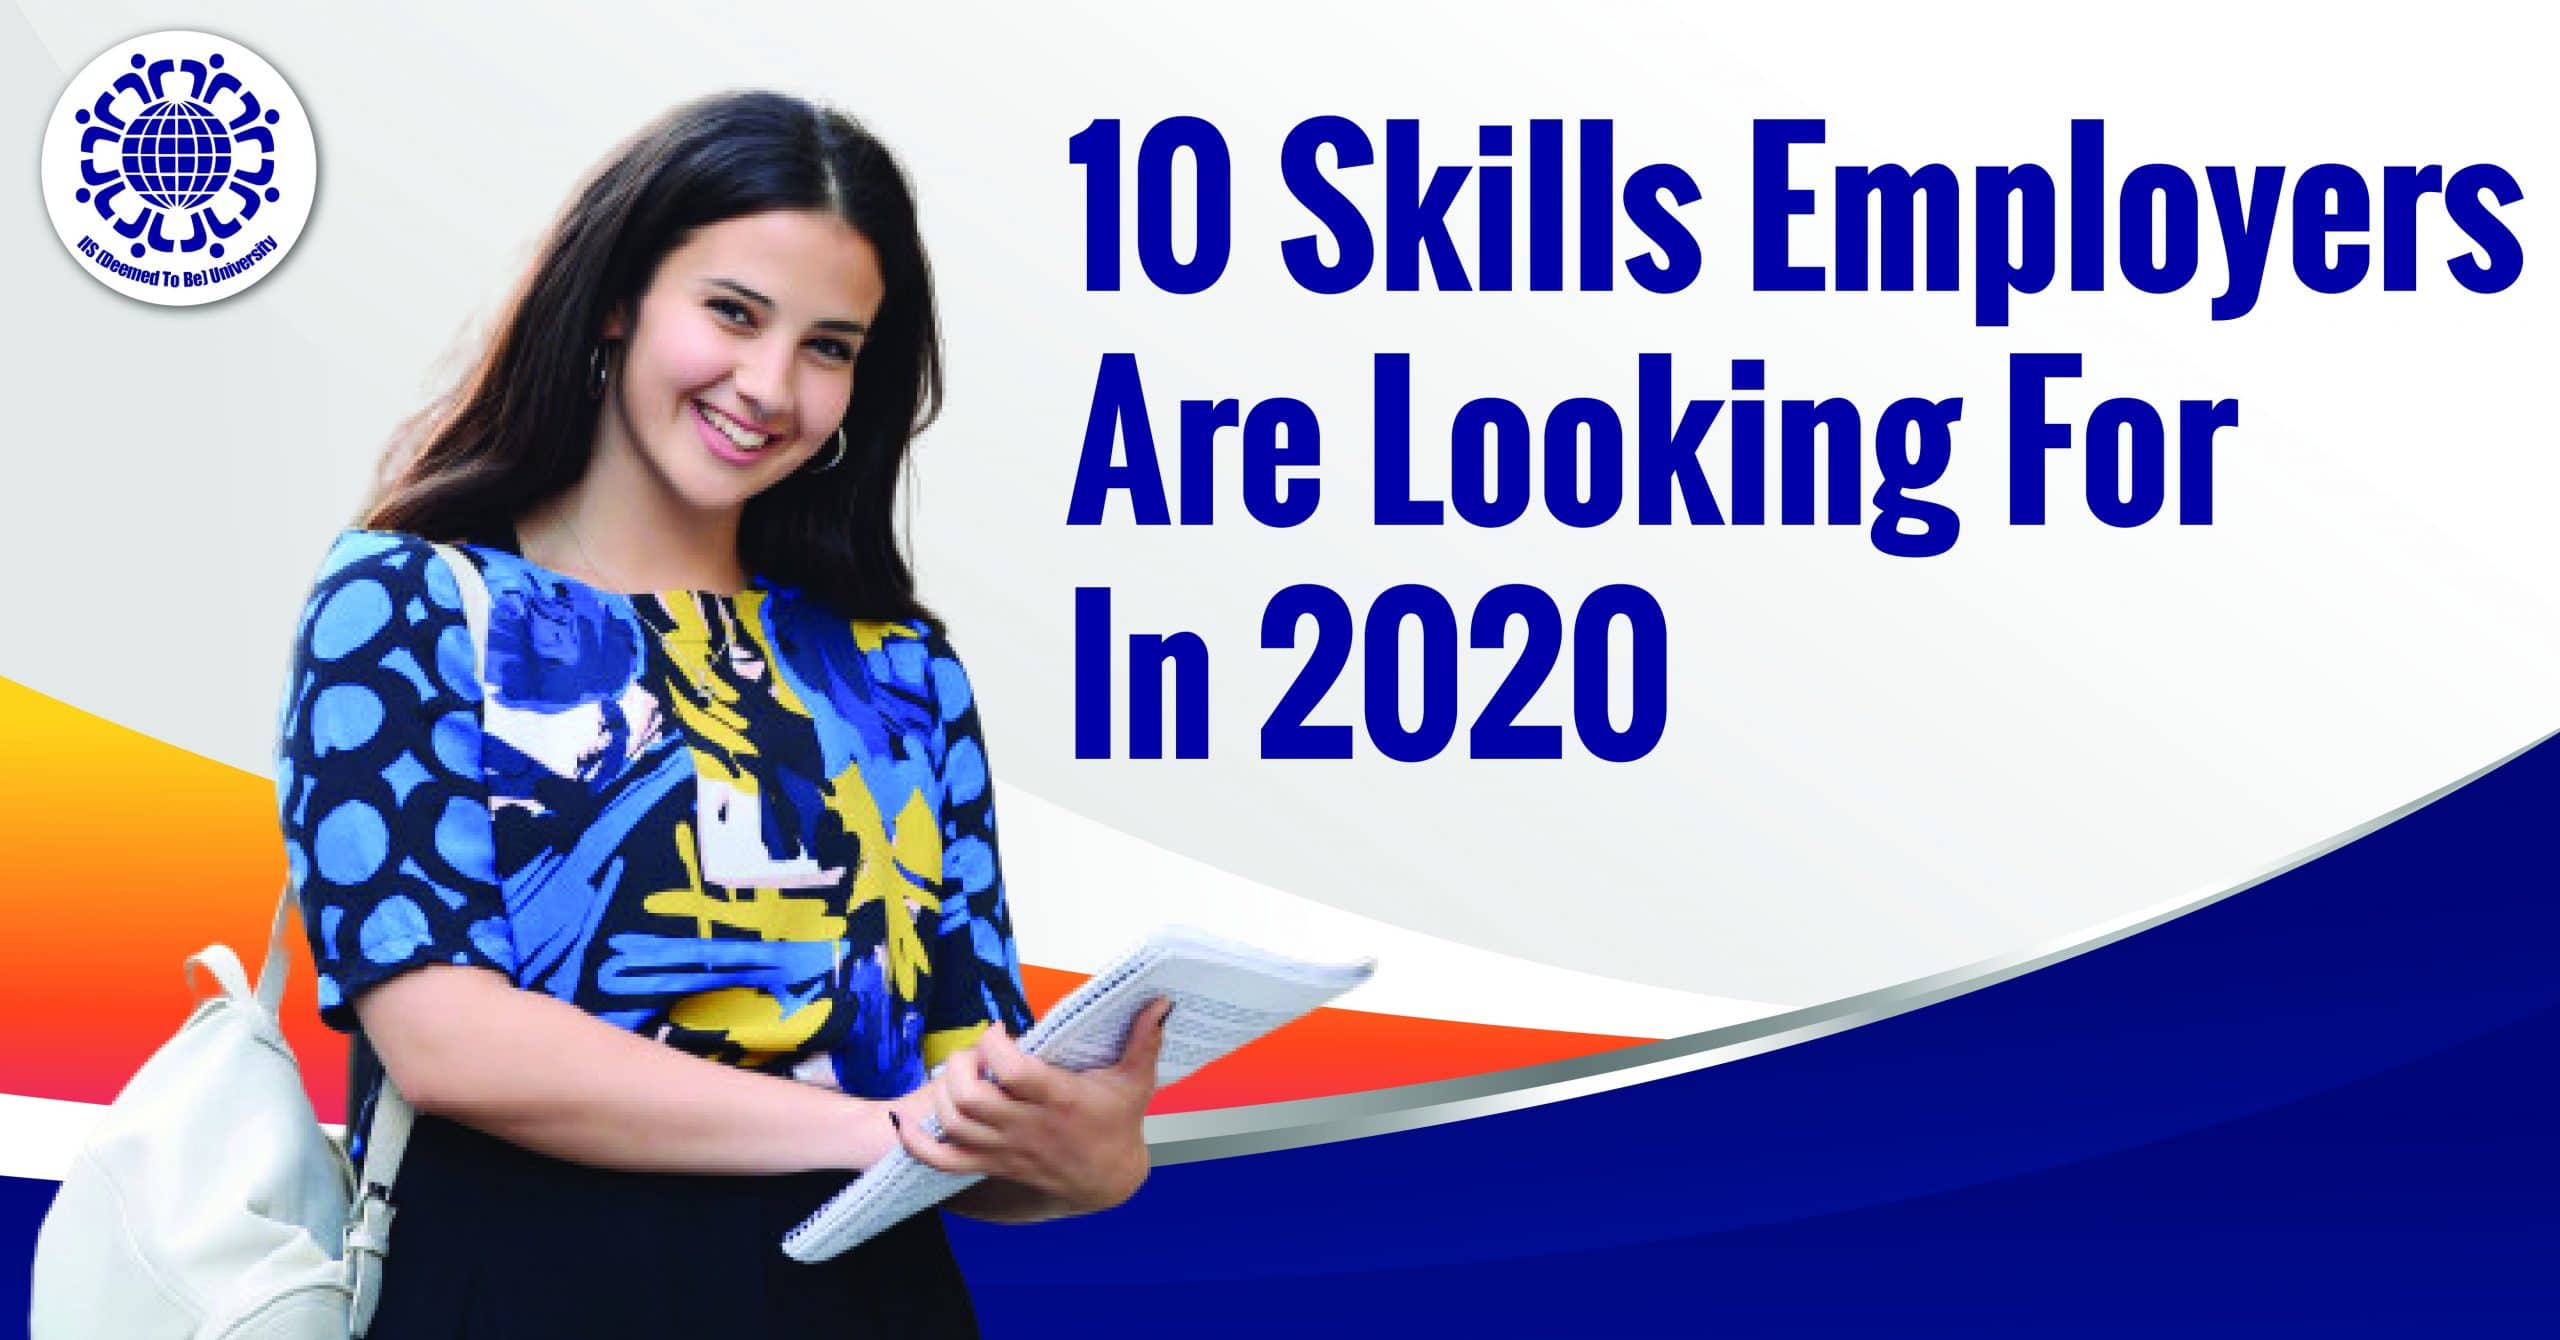 10 Skills Employers Are Looking for in 2020